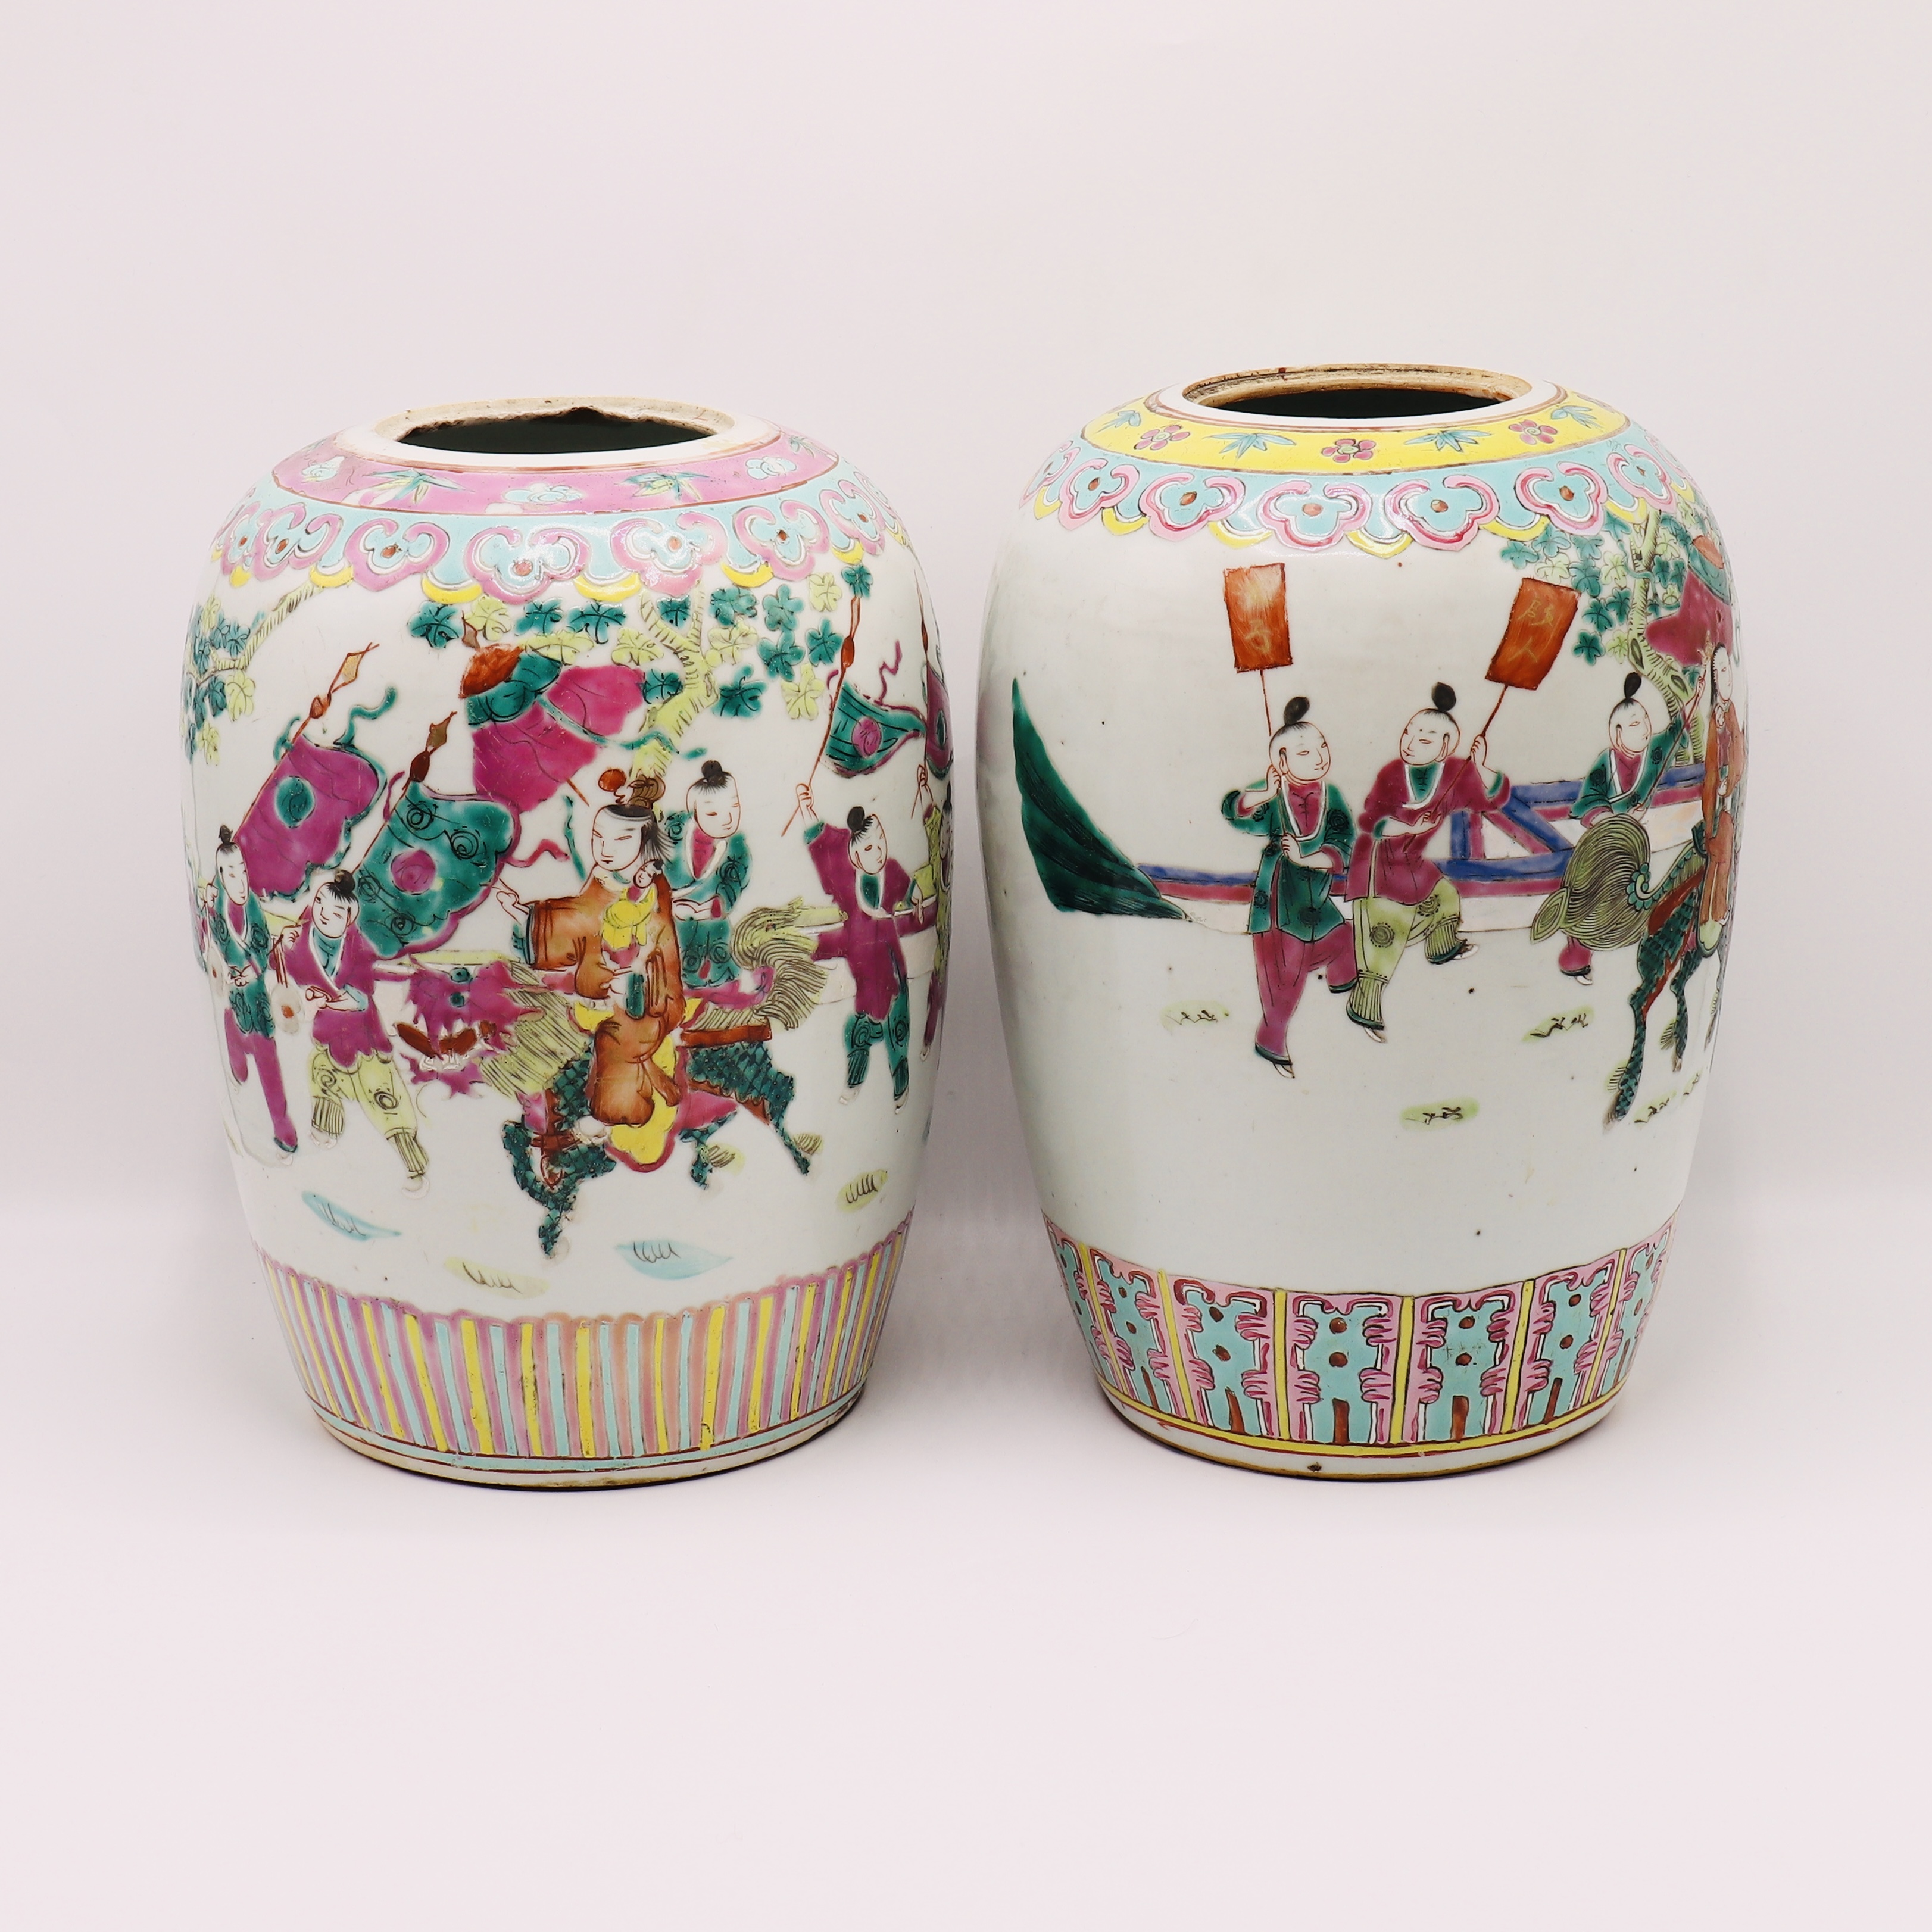 TWO LARGE CHINESE FAMILLE ROSE VASES, QING DYNASTY (1644-1911) - Image 2 of 5